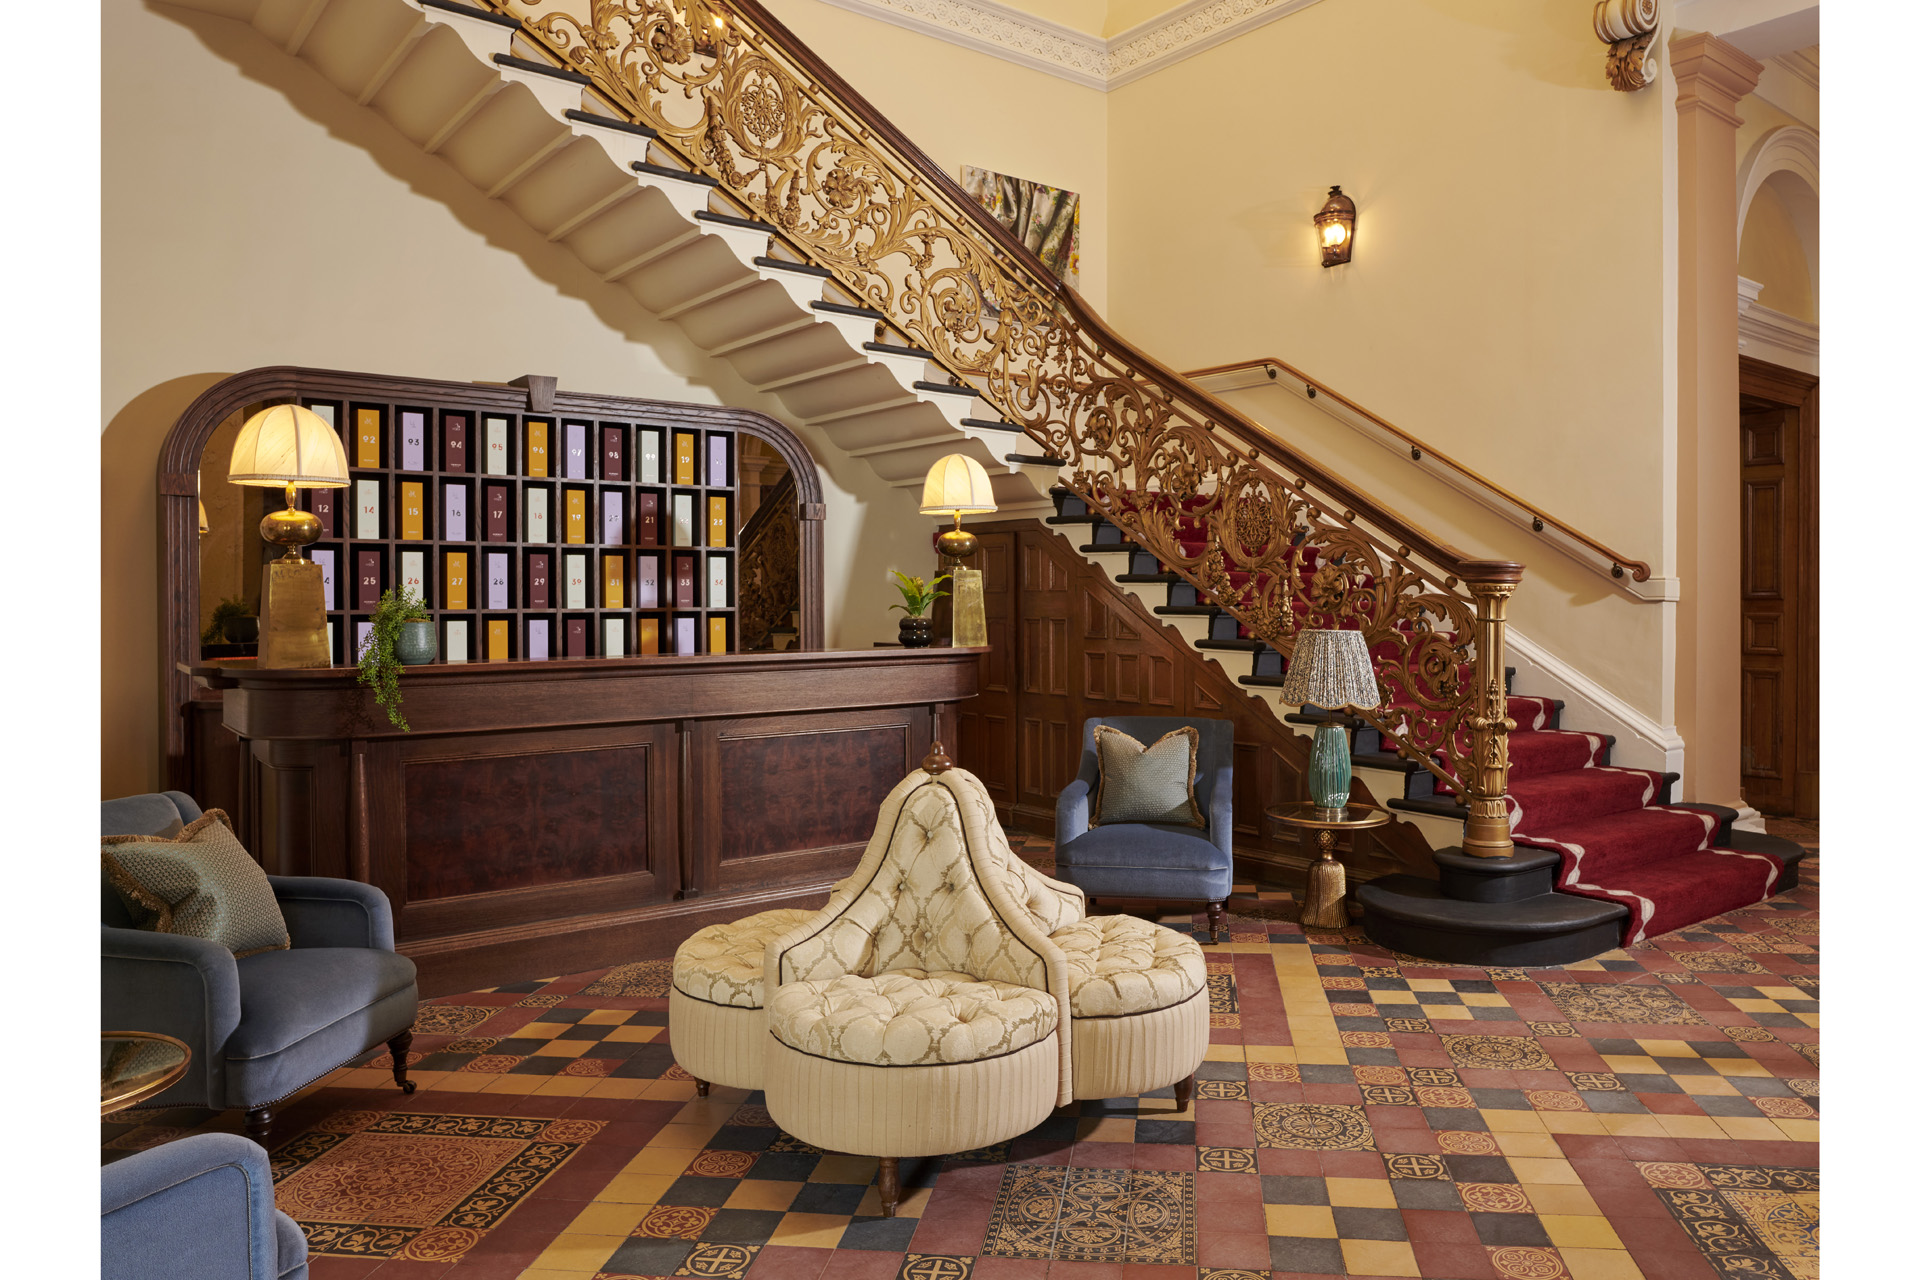 The Gleneagles Townhouse lobby with ornate staircase